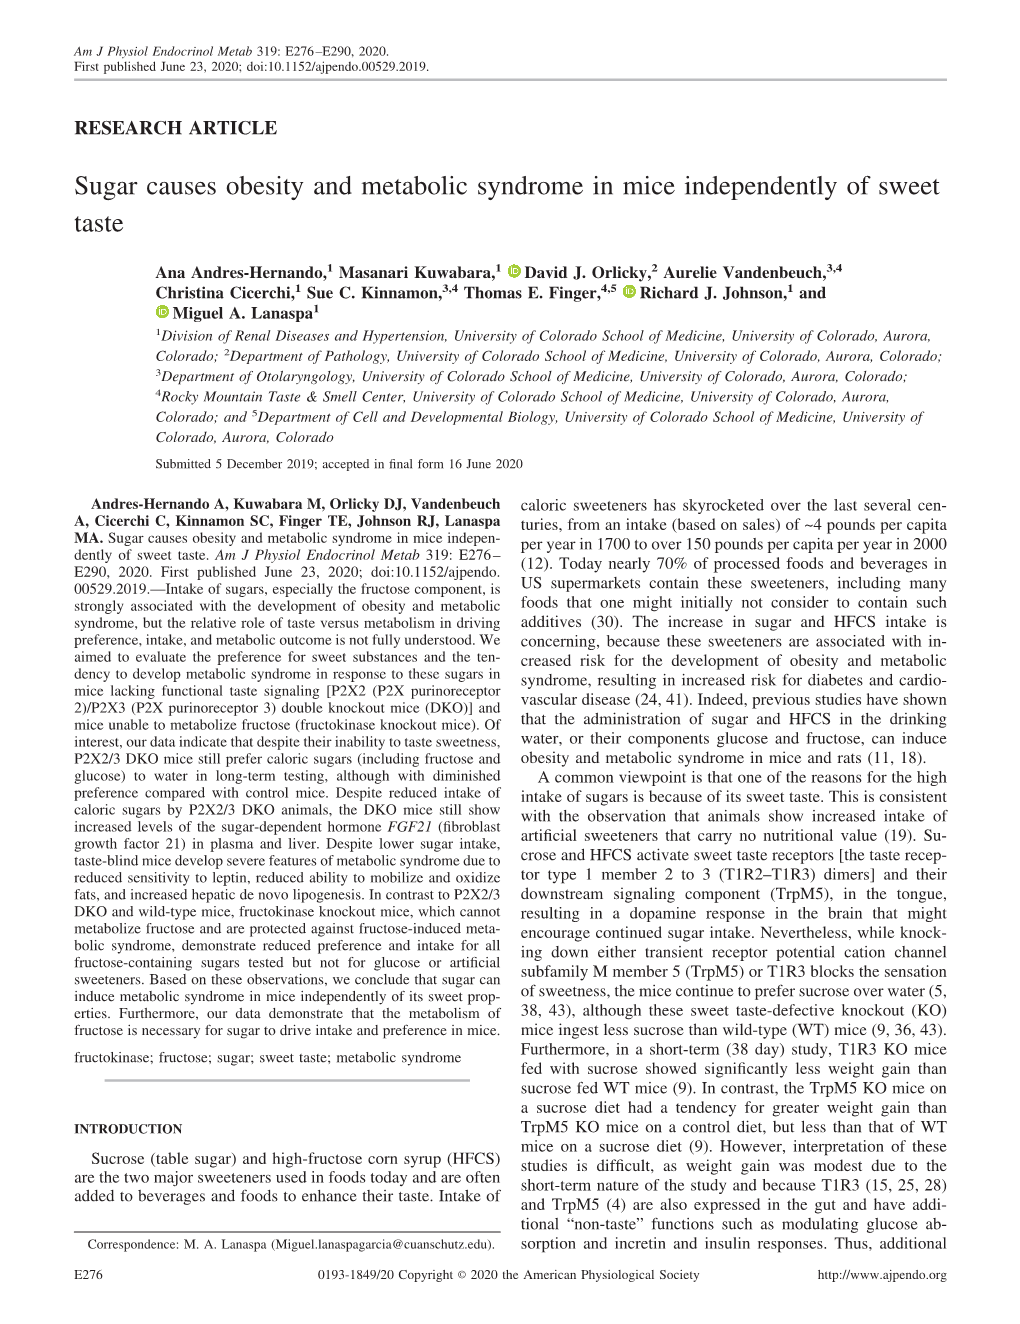 Sugar Causes Obesity and Metabolic Syndrome in Mice Independently of Sweet Taste